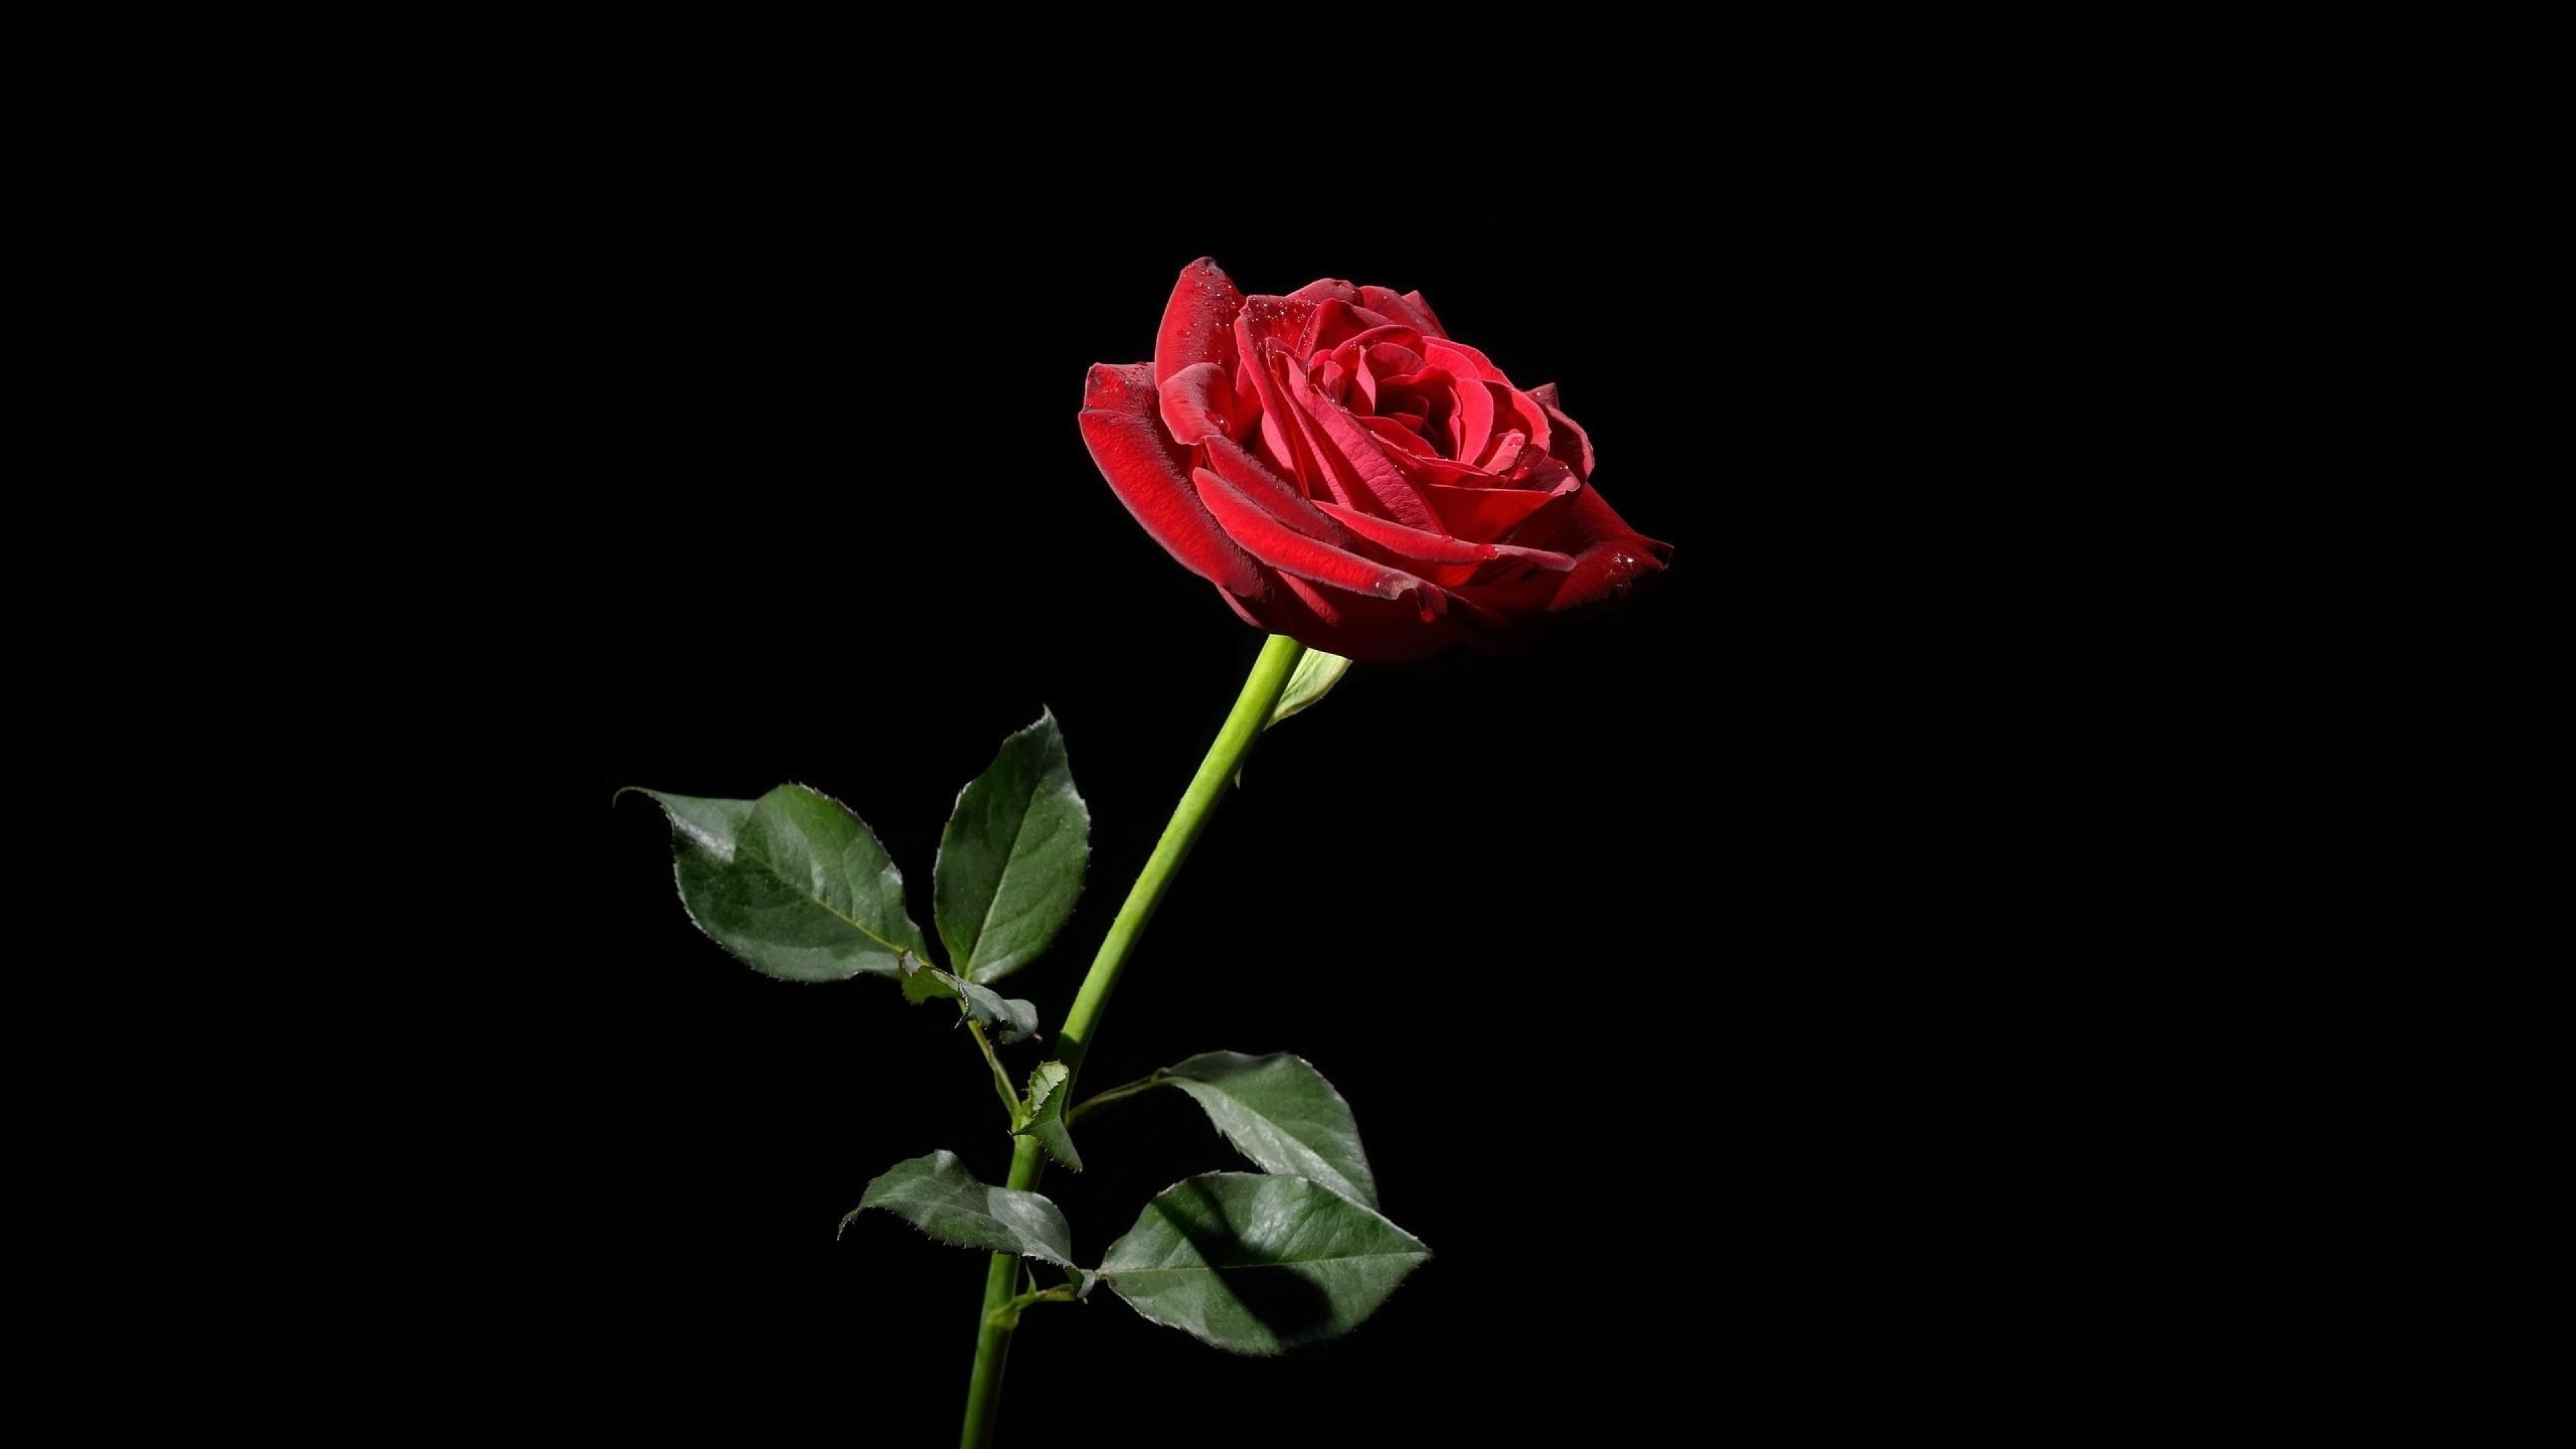 3840x2160 ( px), 4458 FBYX - Black And Red Rose Wallpaper